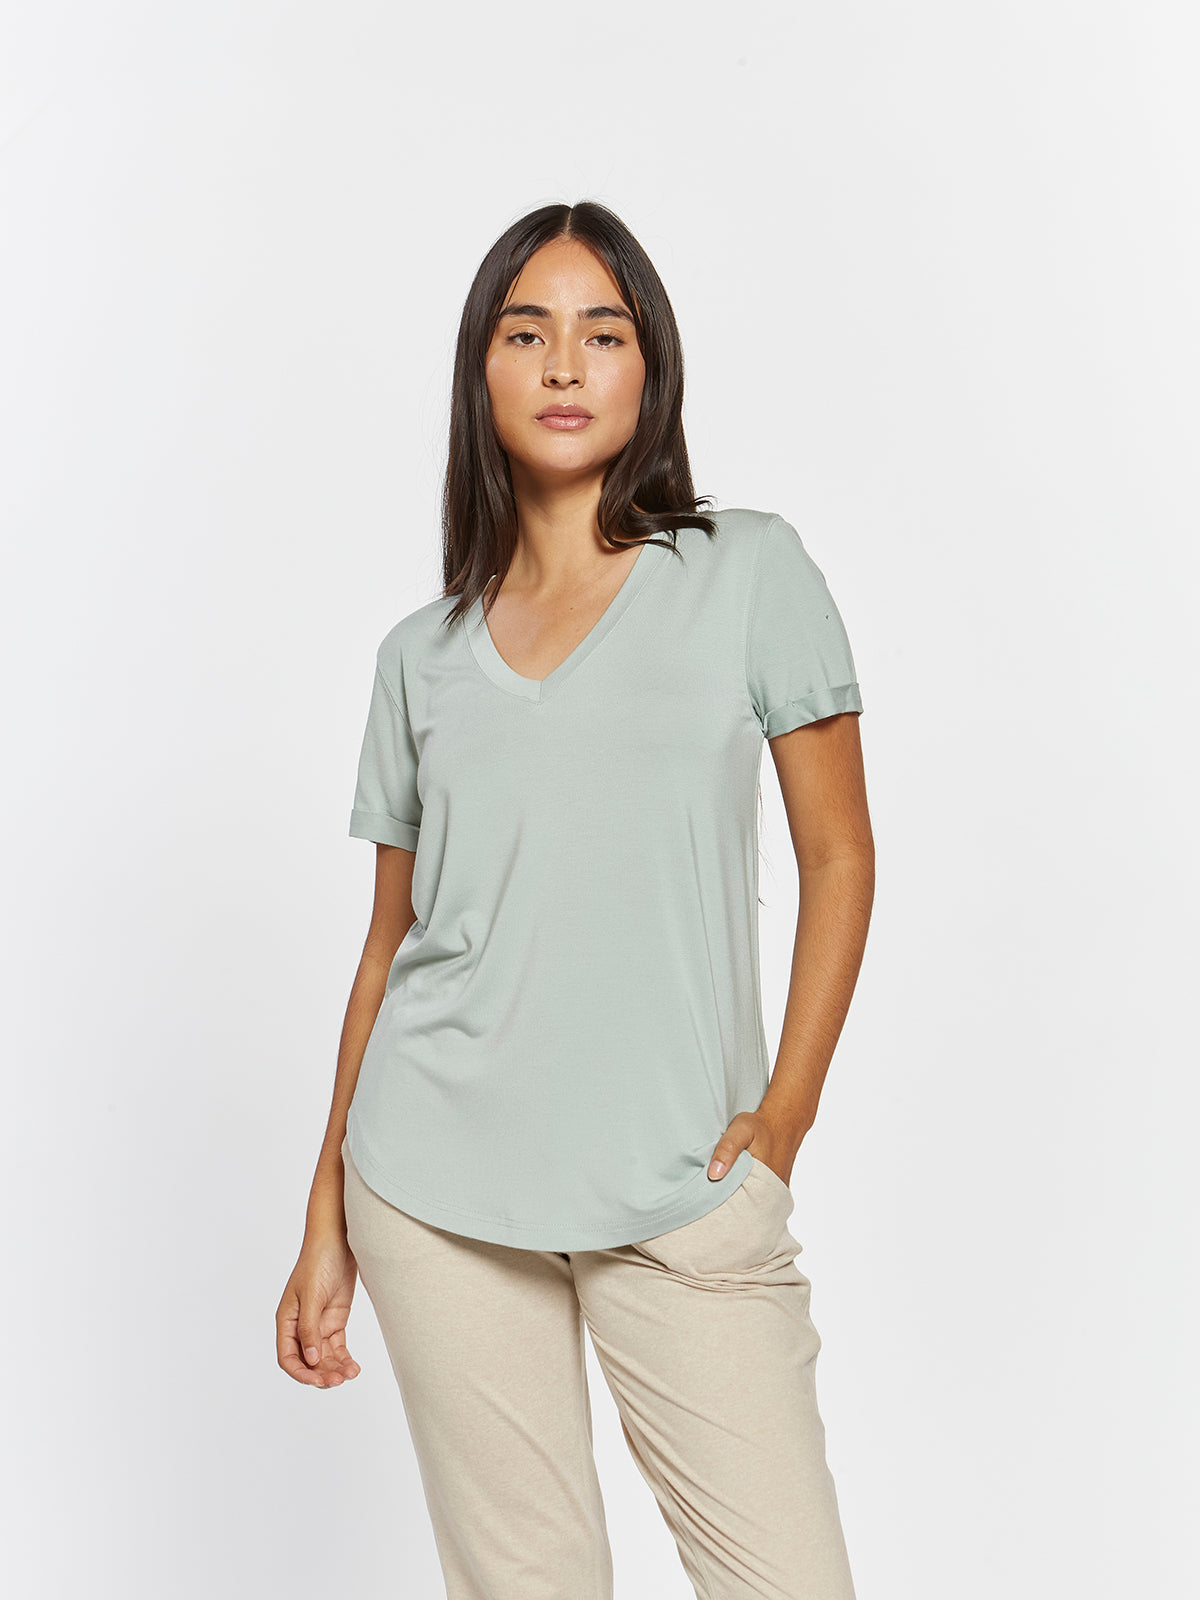 LANELLE TEE - PRE PACK 6 UNITS